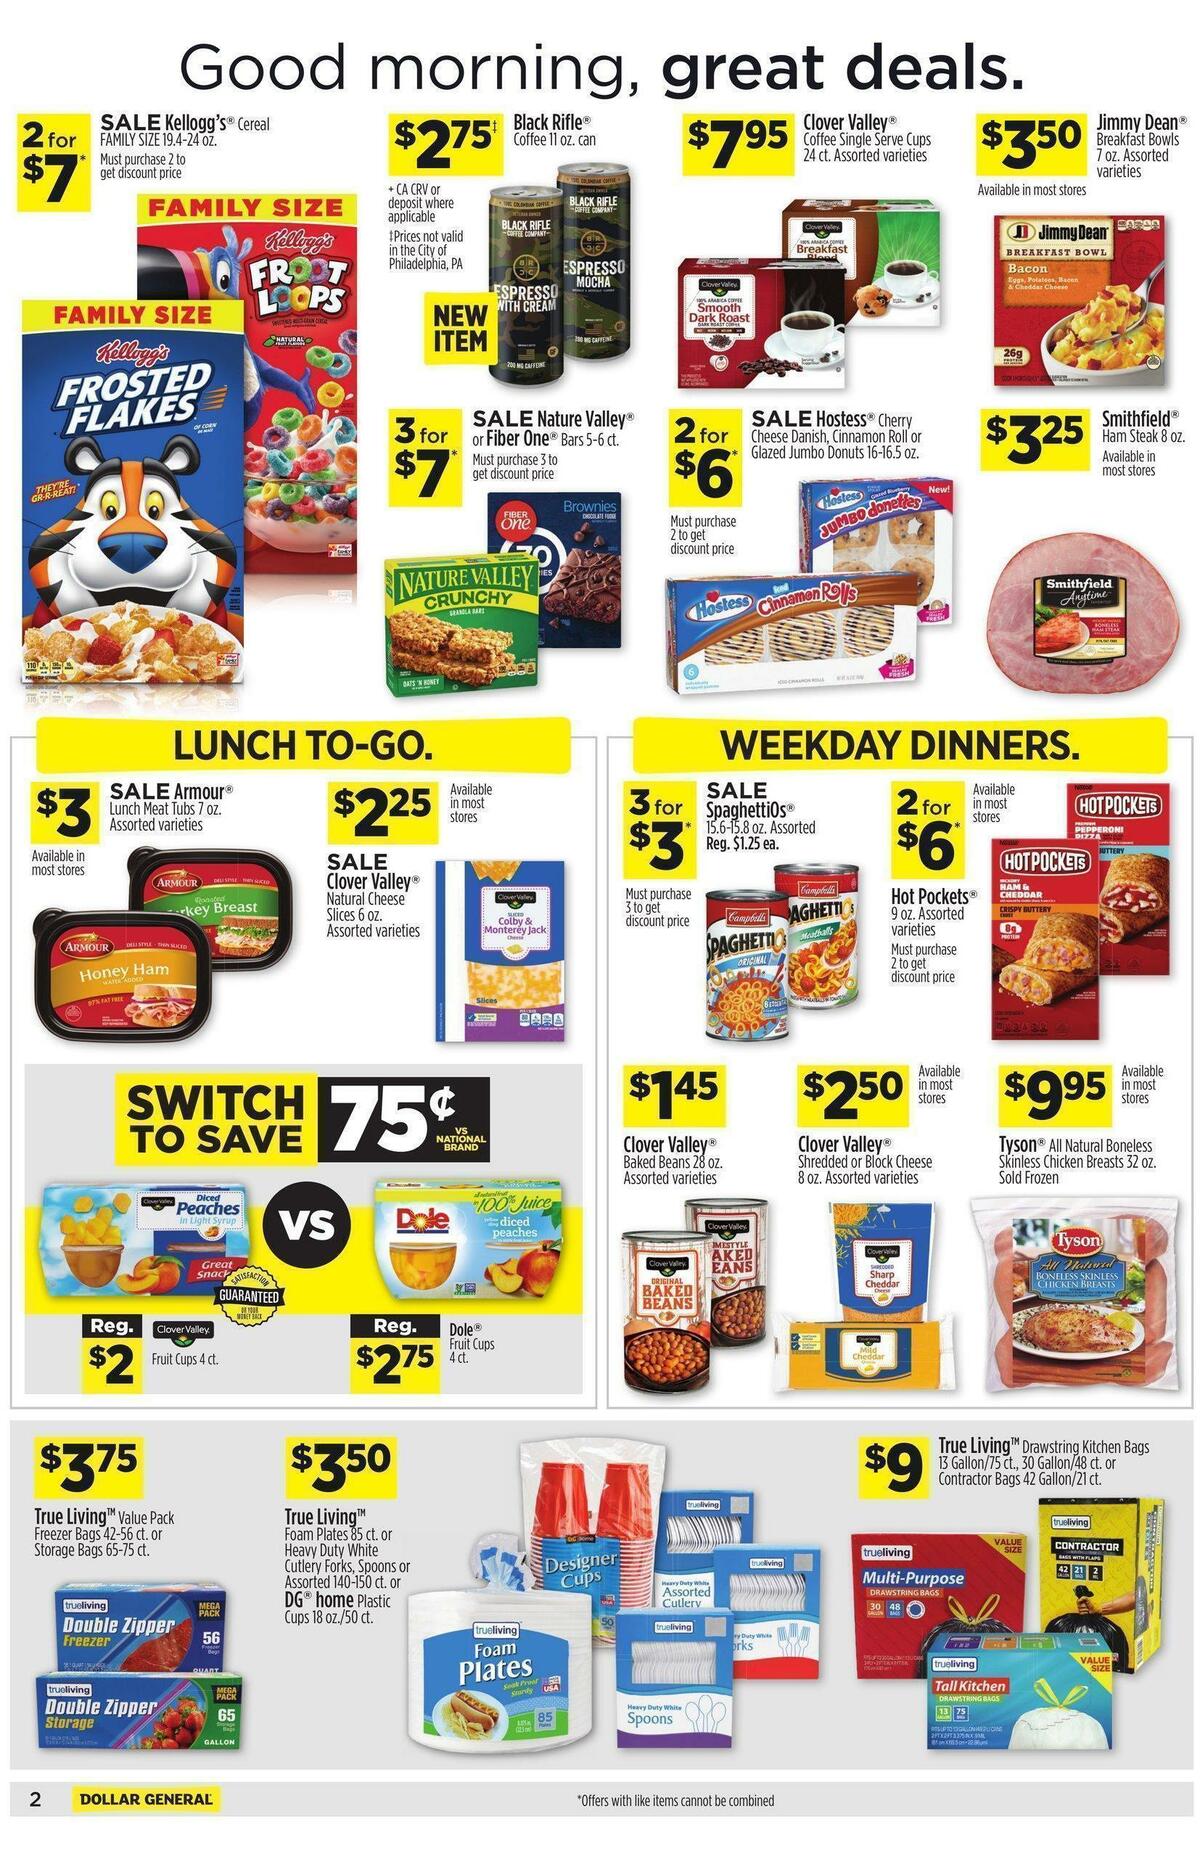 Dollar General Weekly Ad from May 8